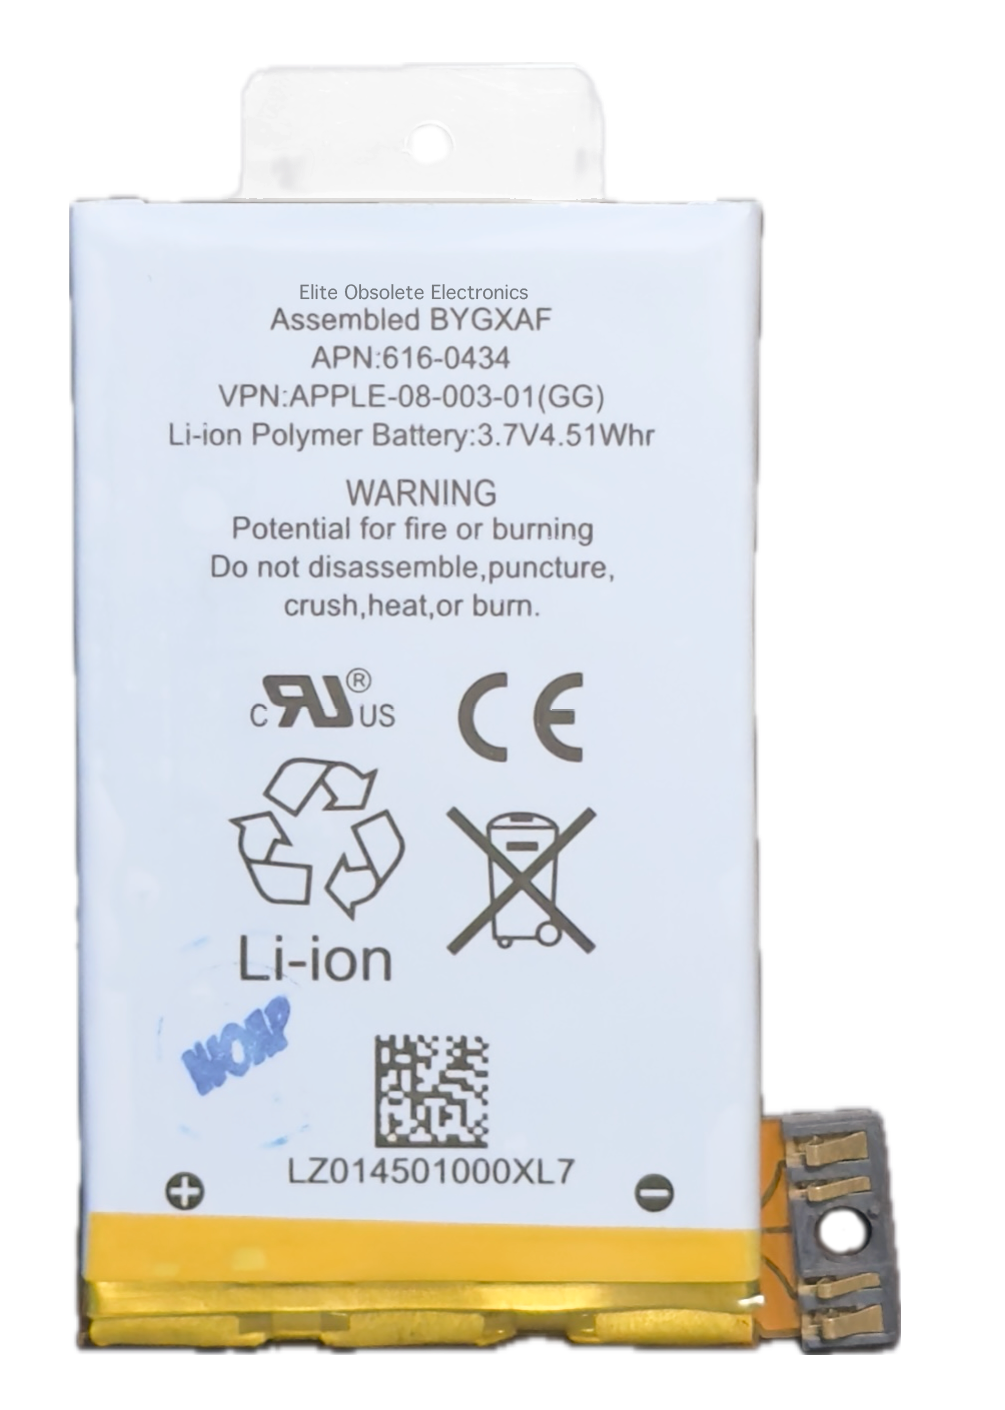 New 1220mah Lithium-Ion Polymer Battery for Apple iPhone 3GS A1241 A1303 A1325 (2009 Model)